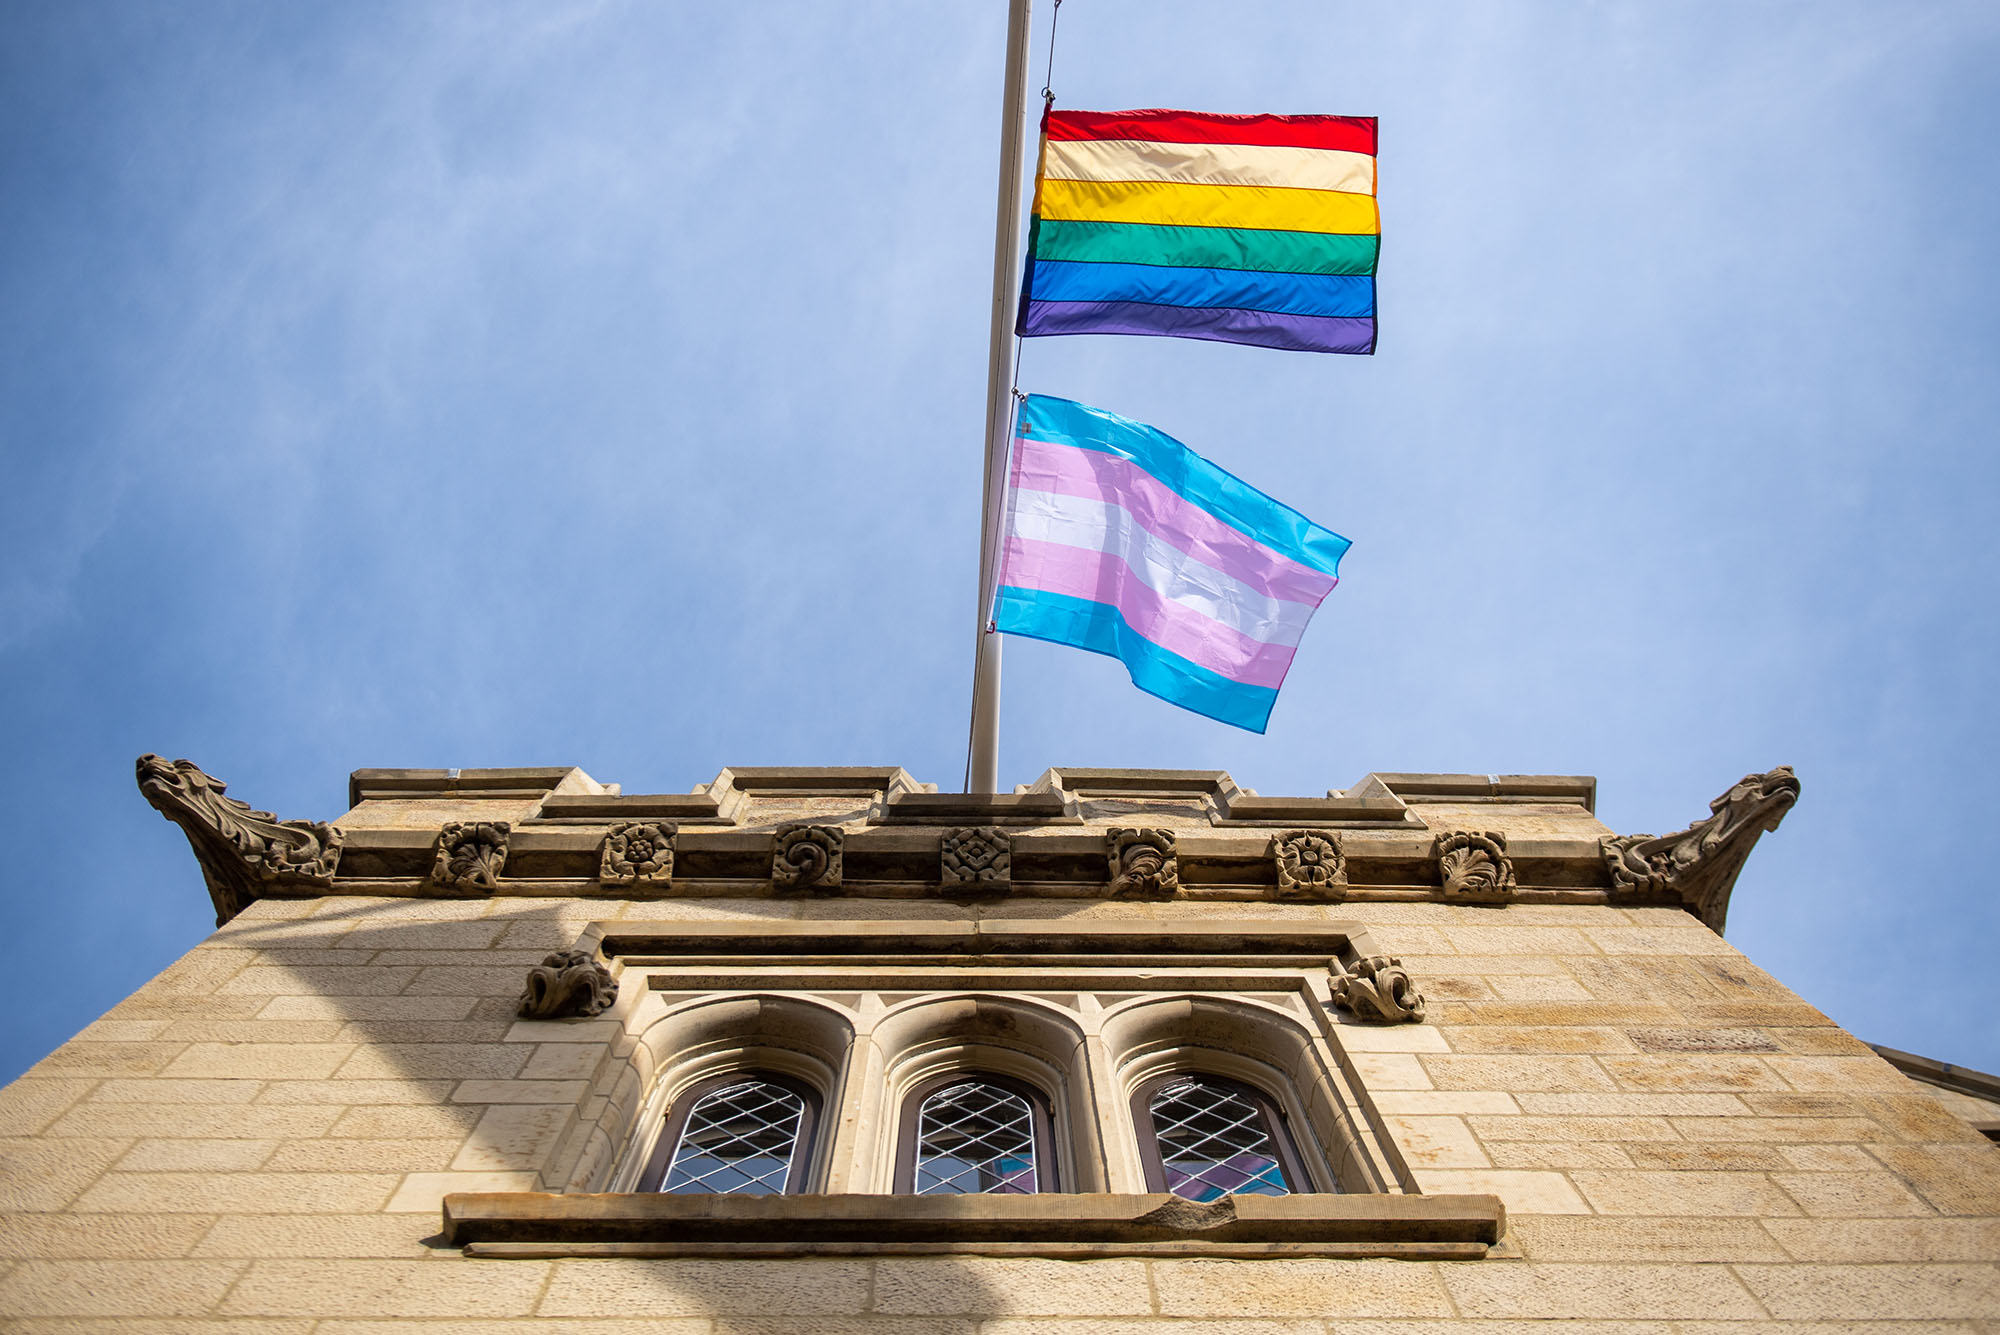 Photo of the Transgender Day of Remembrance flag flying over the Dahod Family Alumni Center. The pride flag (a rainbow flag) and the transgender flag (aa flag of light blue, pink, and white) wave in the wind on a pole attached to a large, tan brick building.